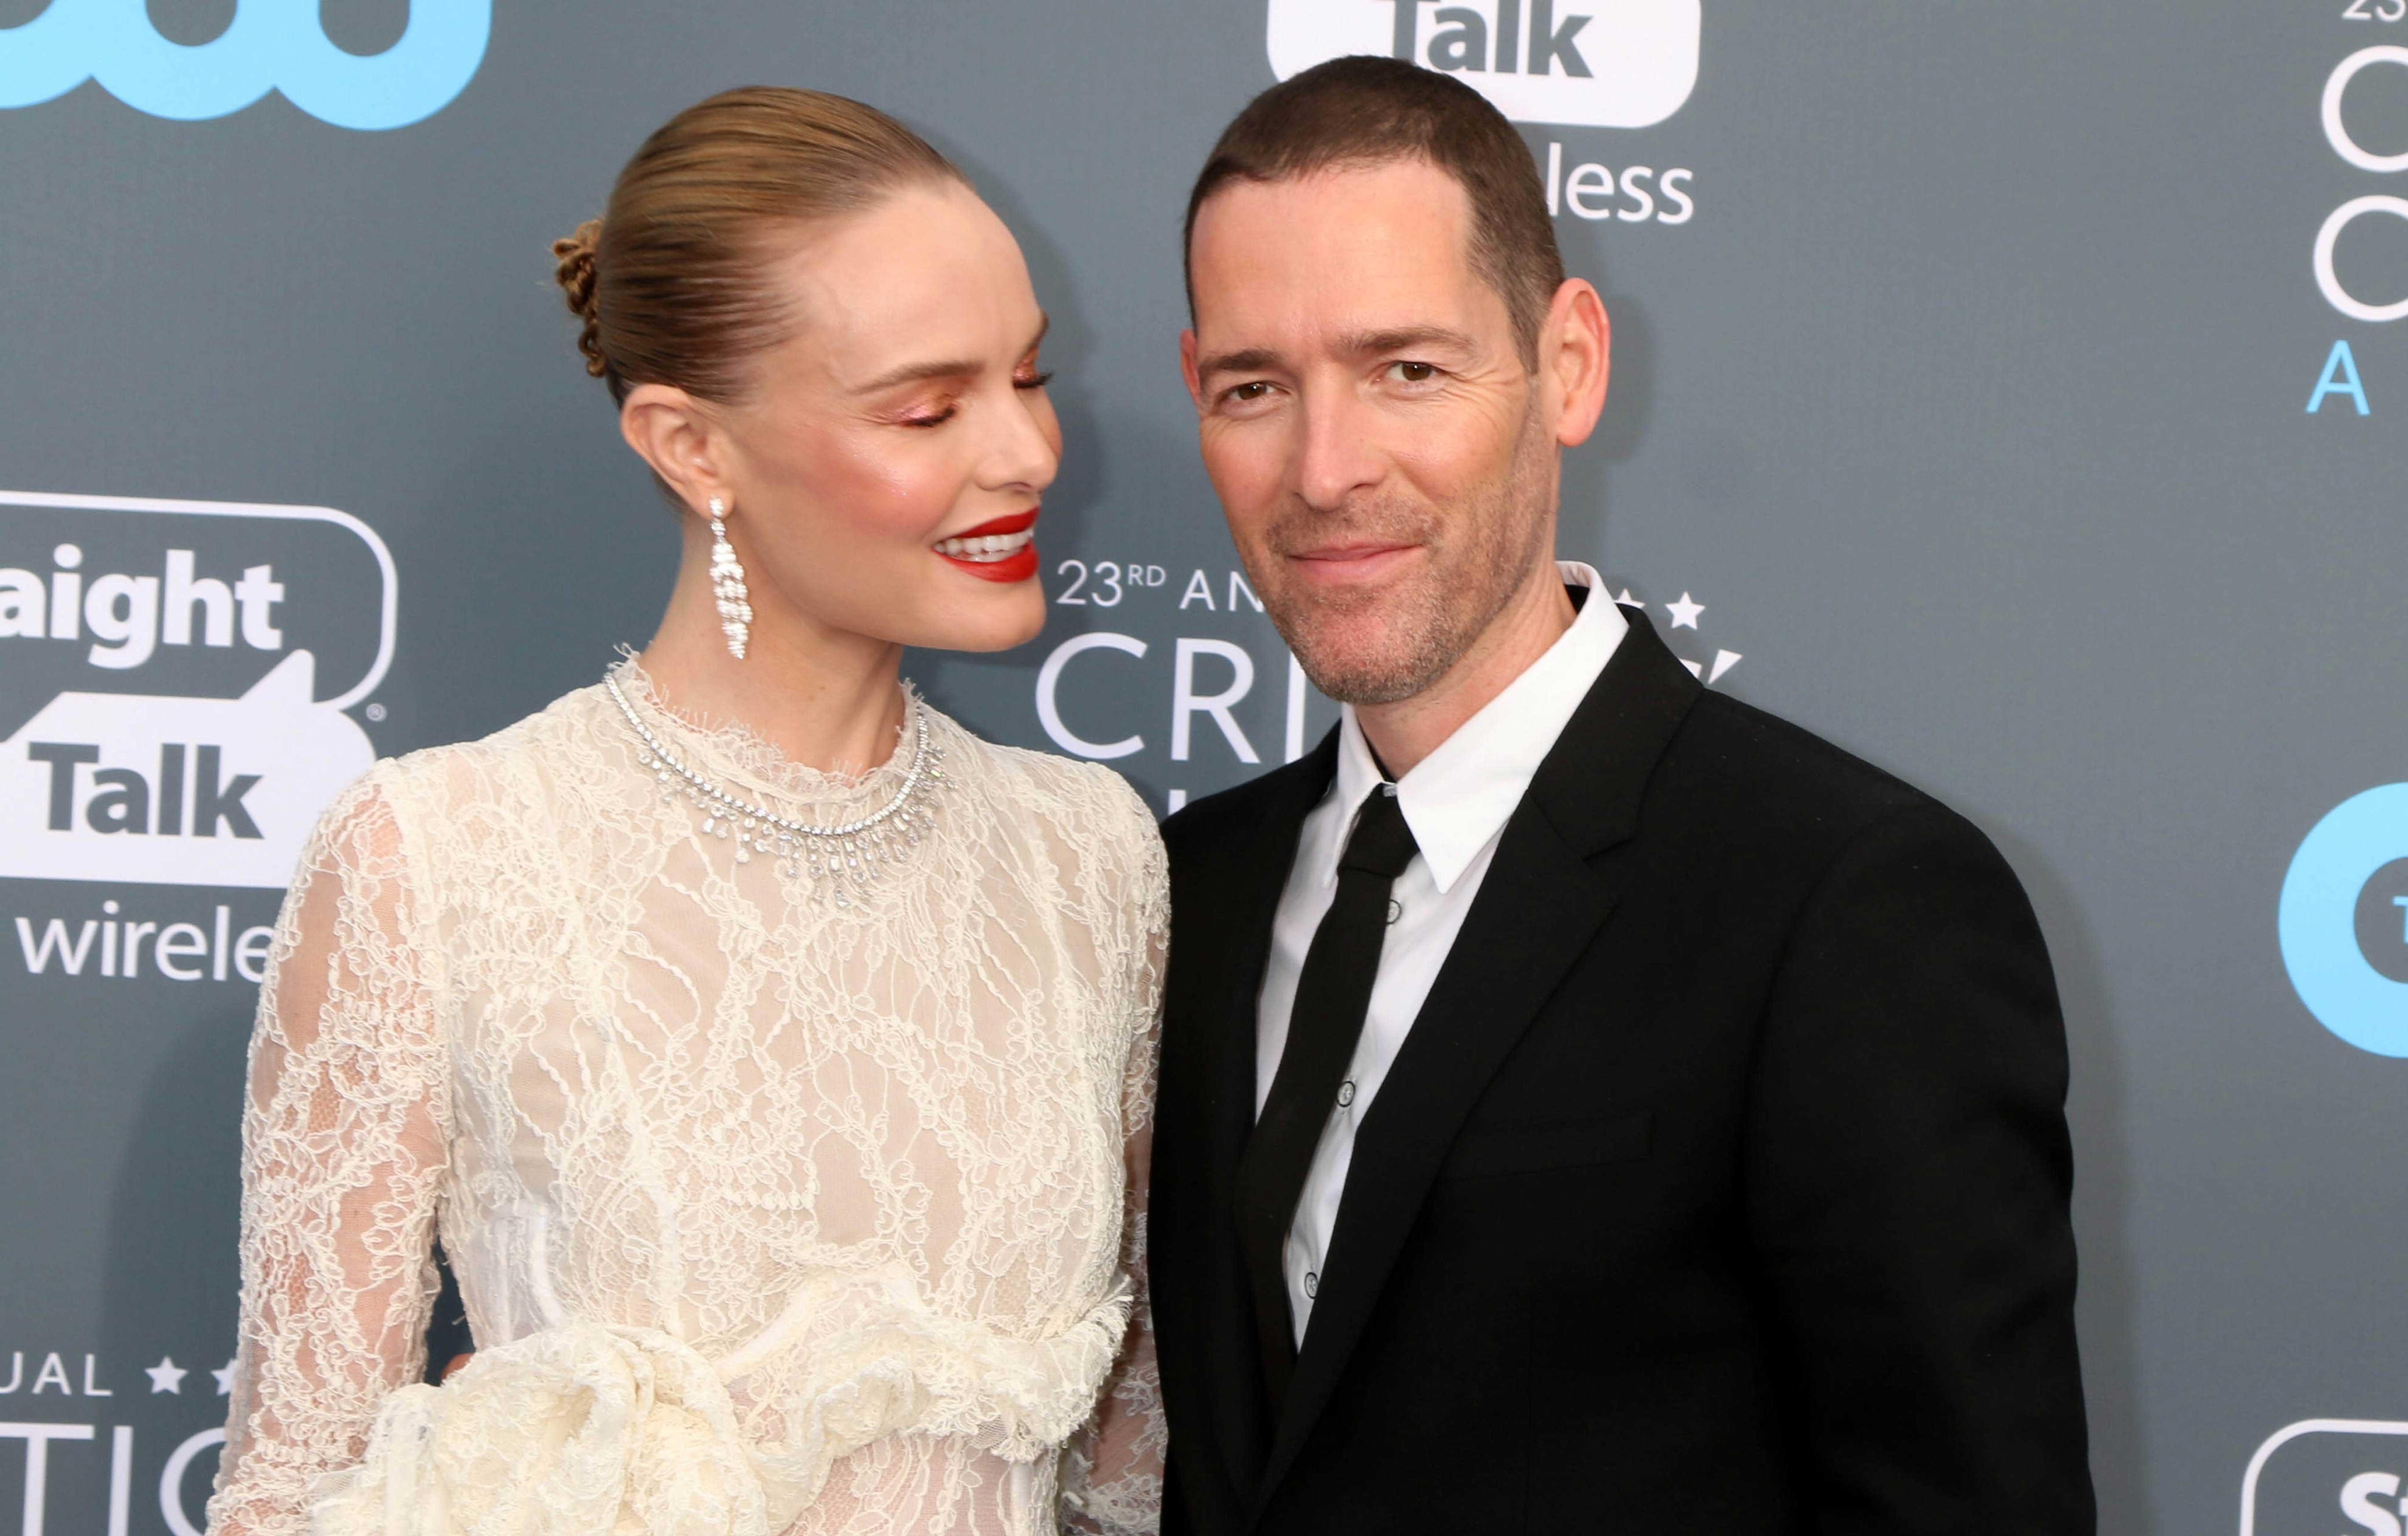 Kate Bosworth Is a 'Heart Breaker' With Hubby Michael Polish: Photo 3802438, Kate Bosworth, Michael Polish Photos